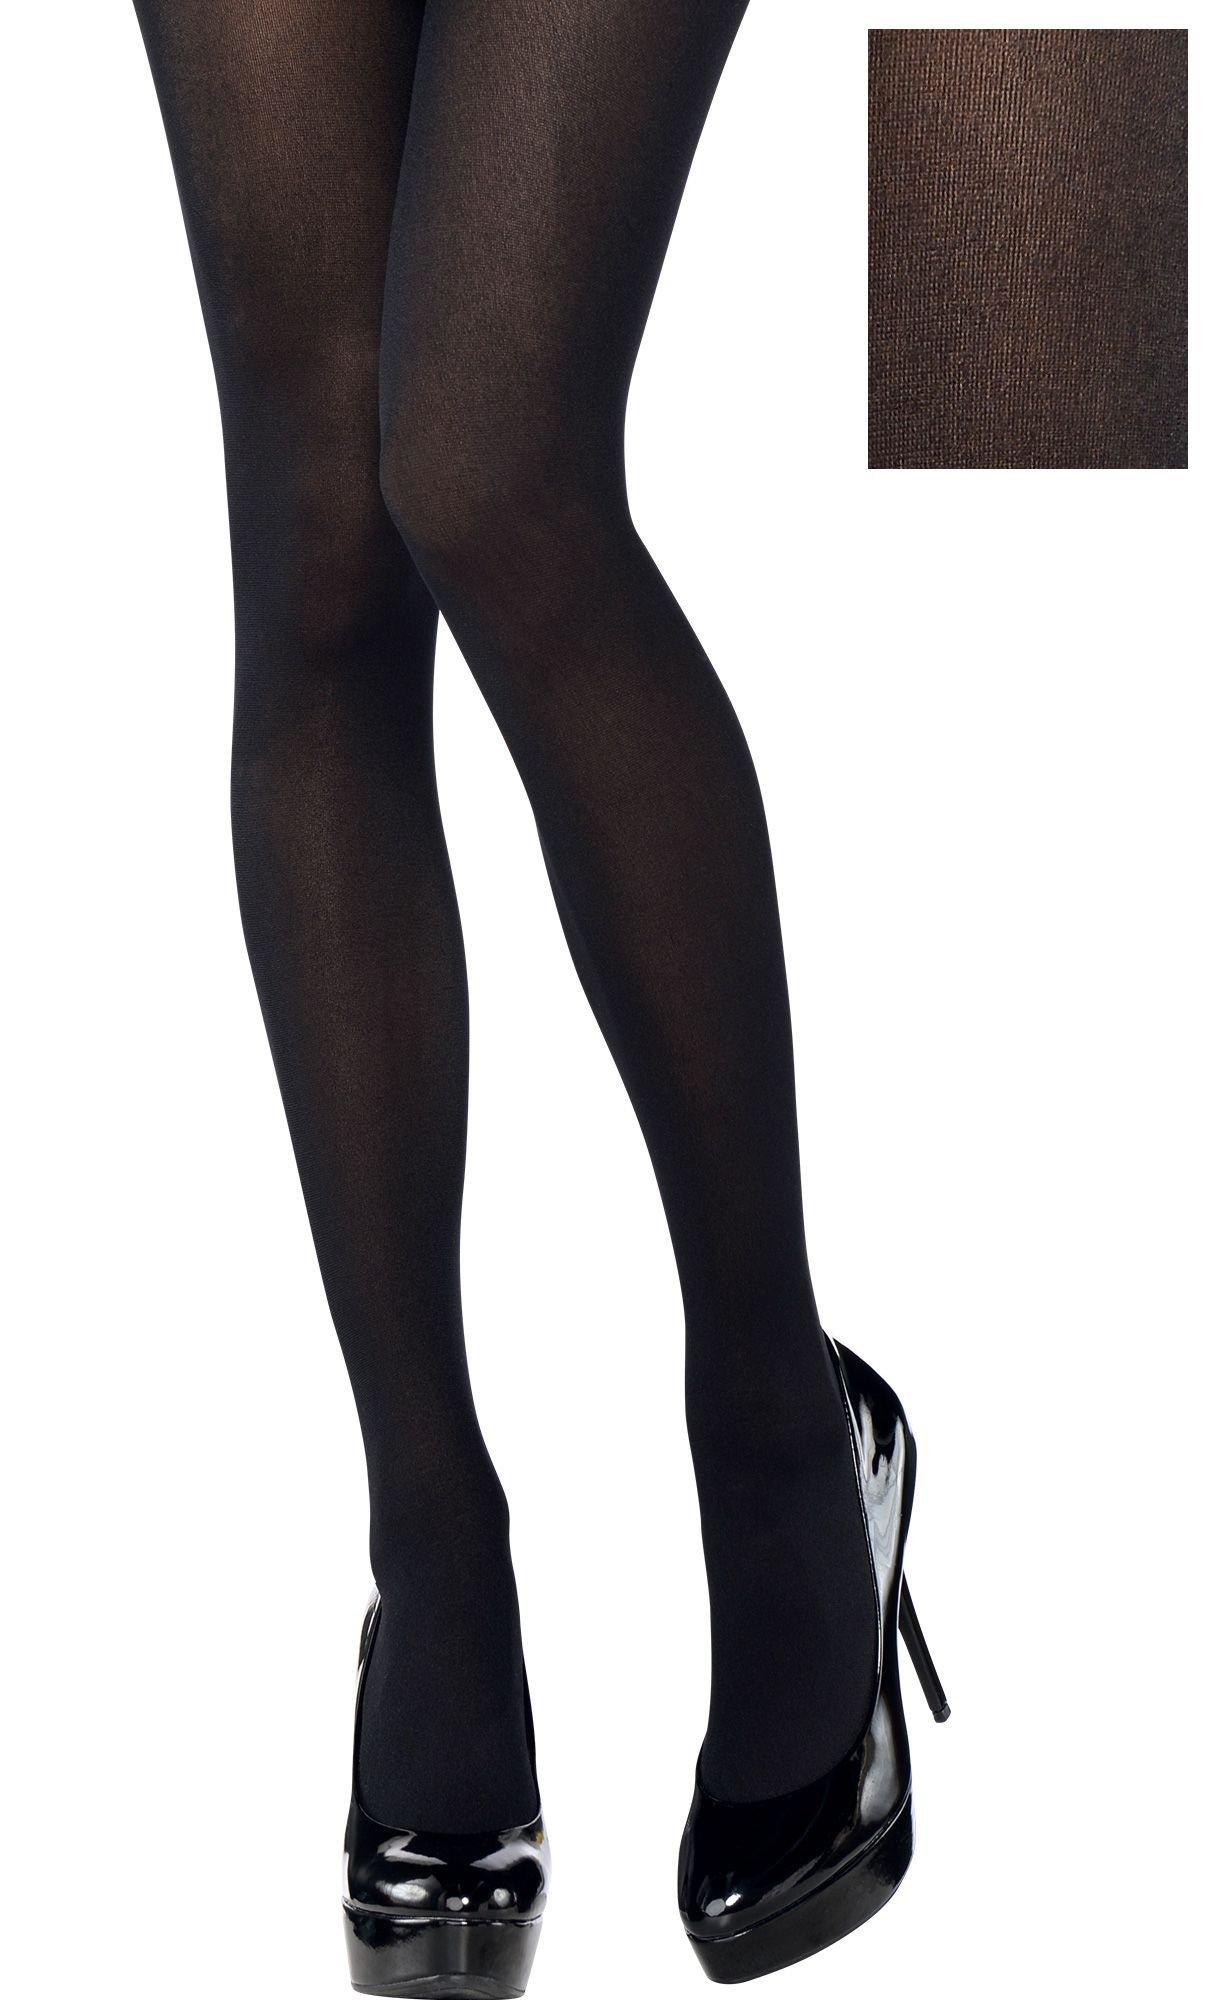 Adult Black Tights | Party City